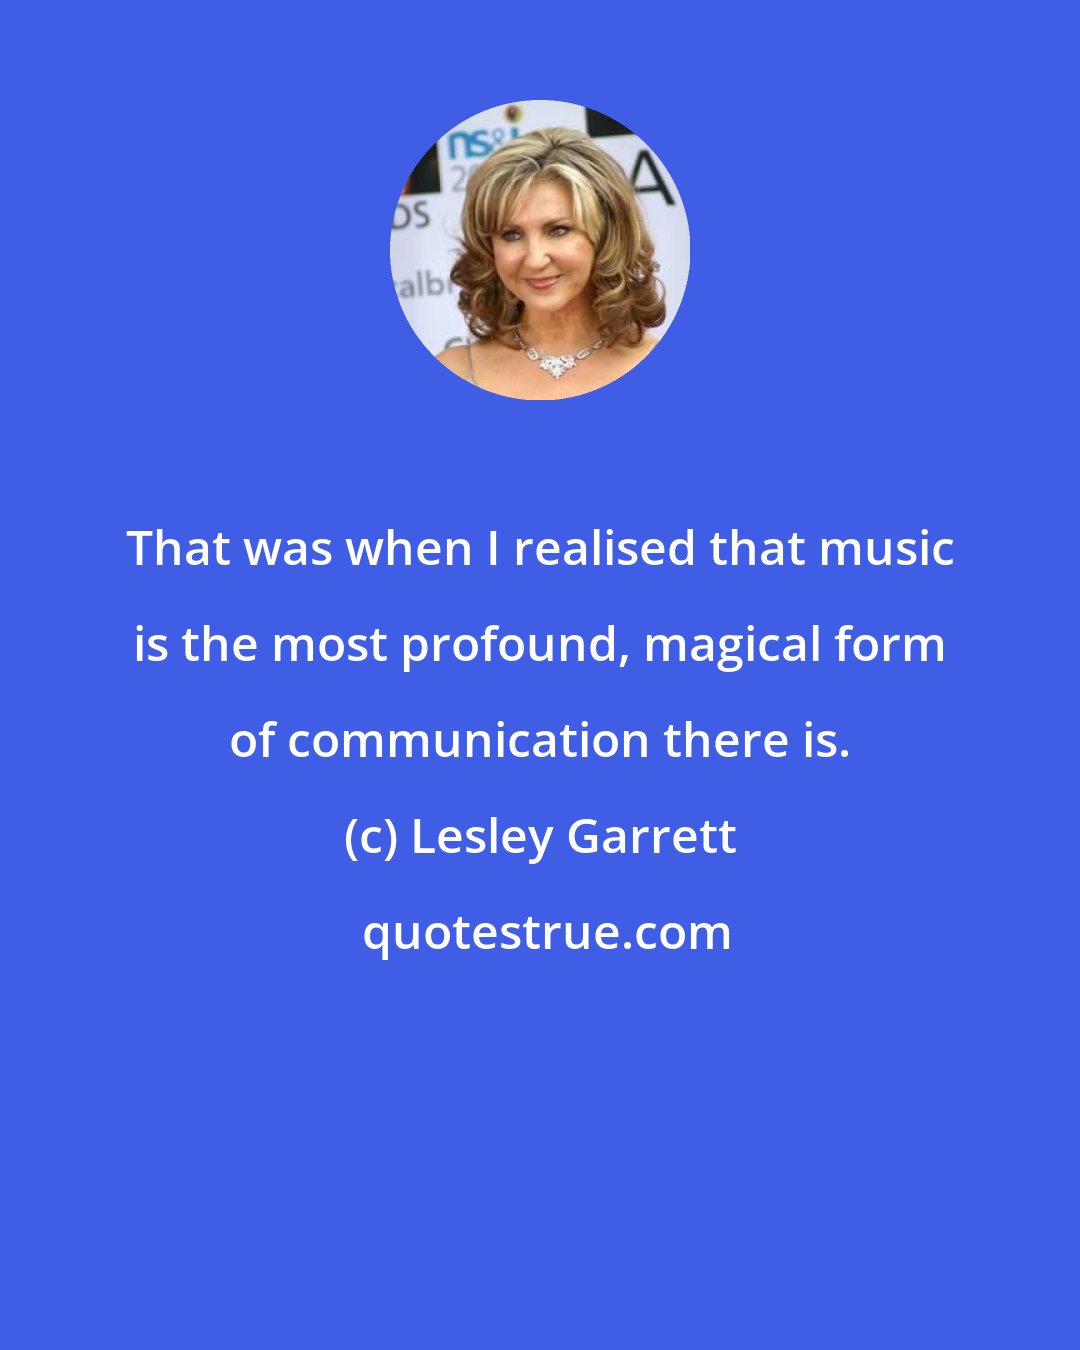 Lesley Garrett: That was when I realised that music is the most profound, magical form of communication there is.